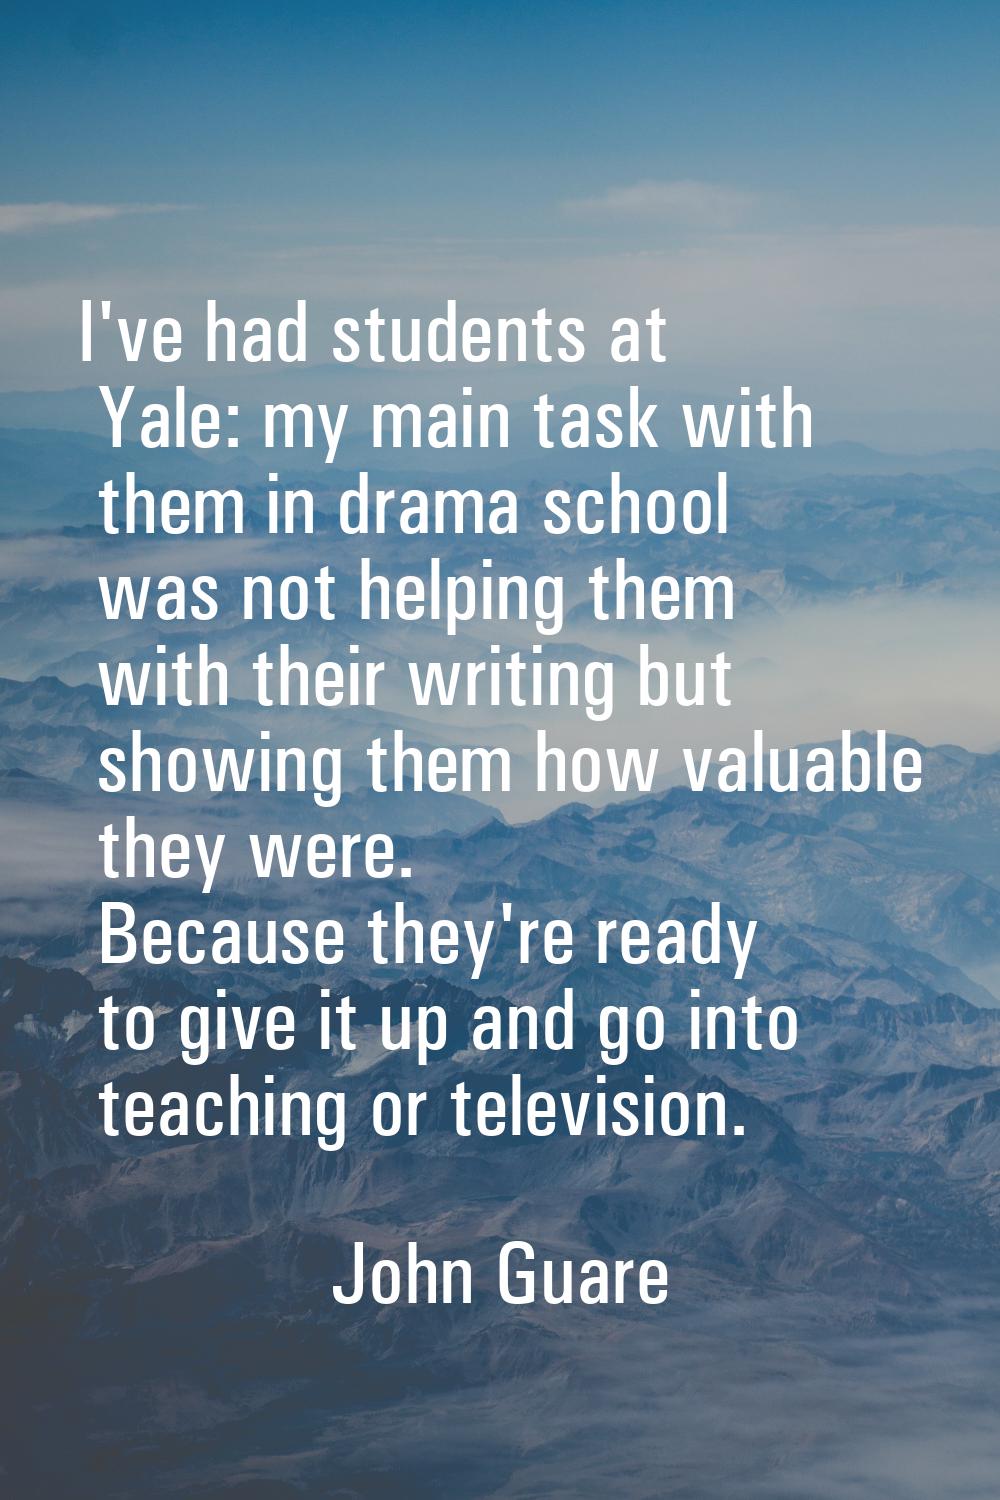 I've had students at Yale: my main task with them in drama school was not helping them with their w